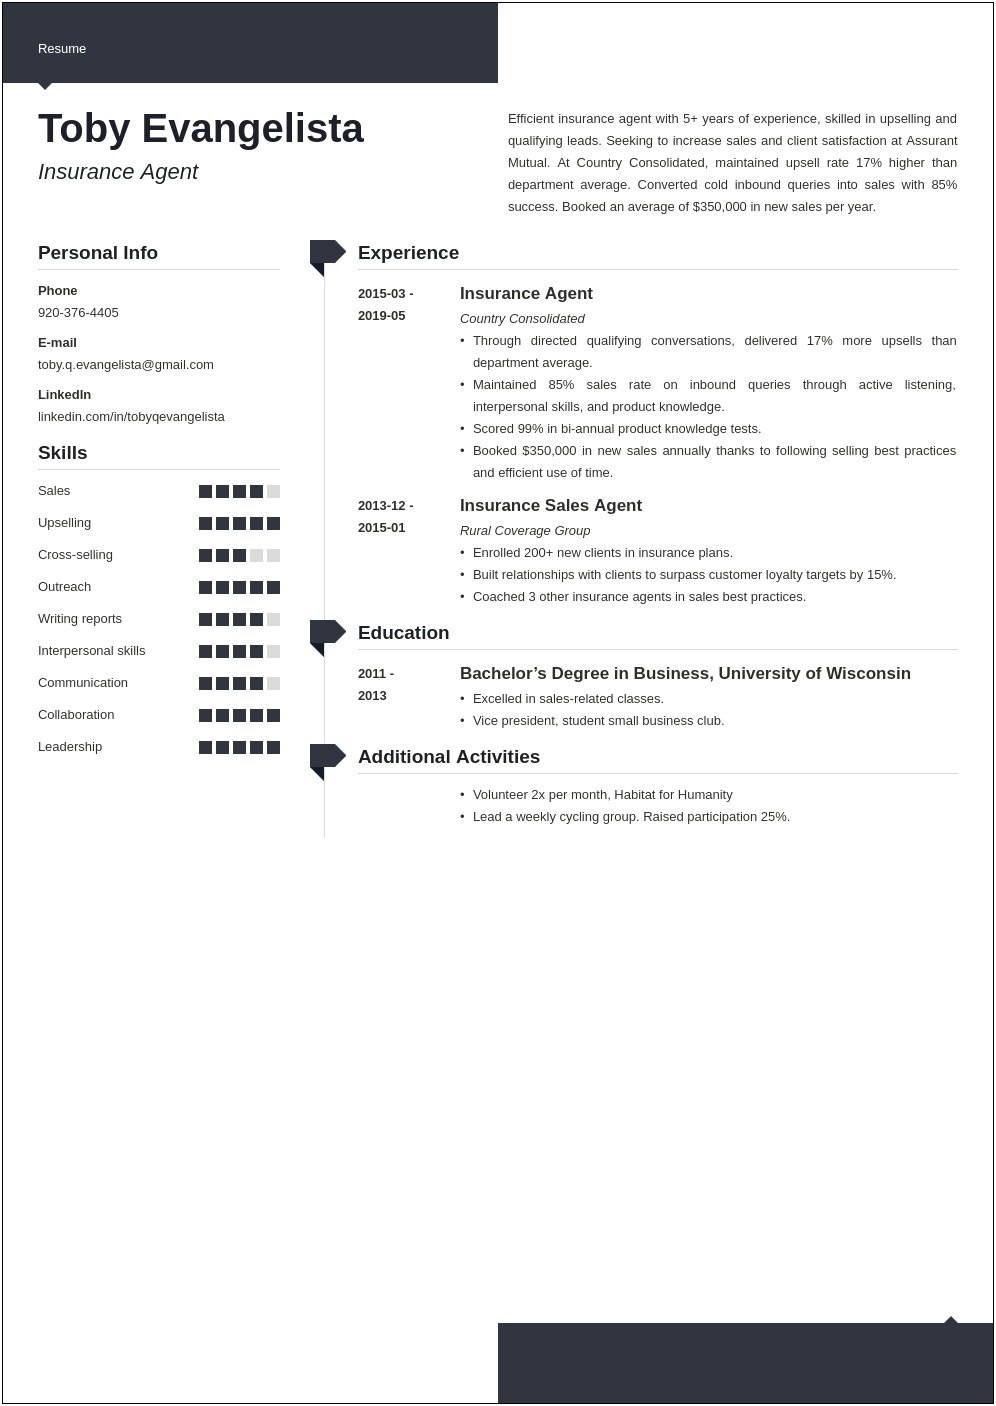 Sample Resume For Property And Casualty Insurance Agent